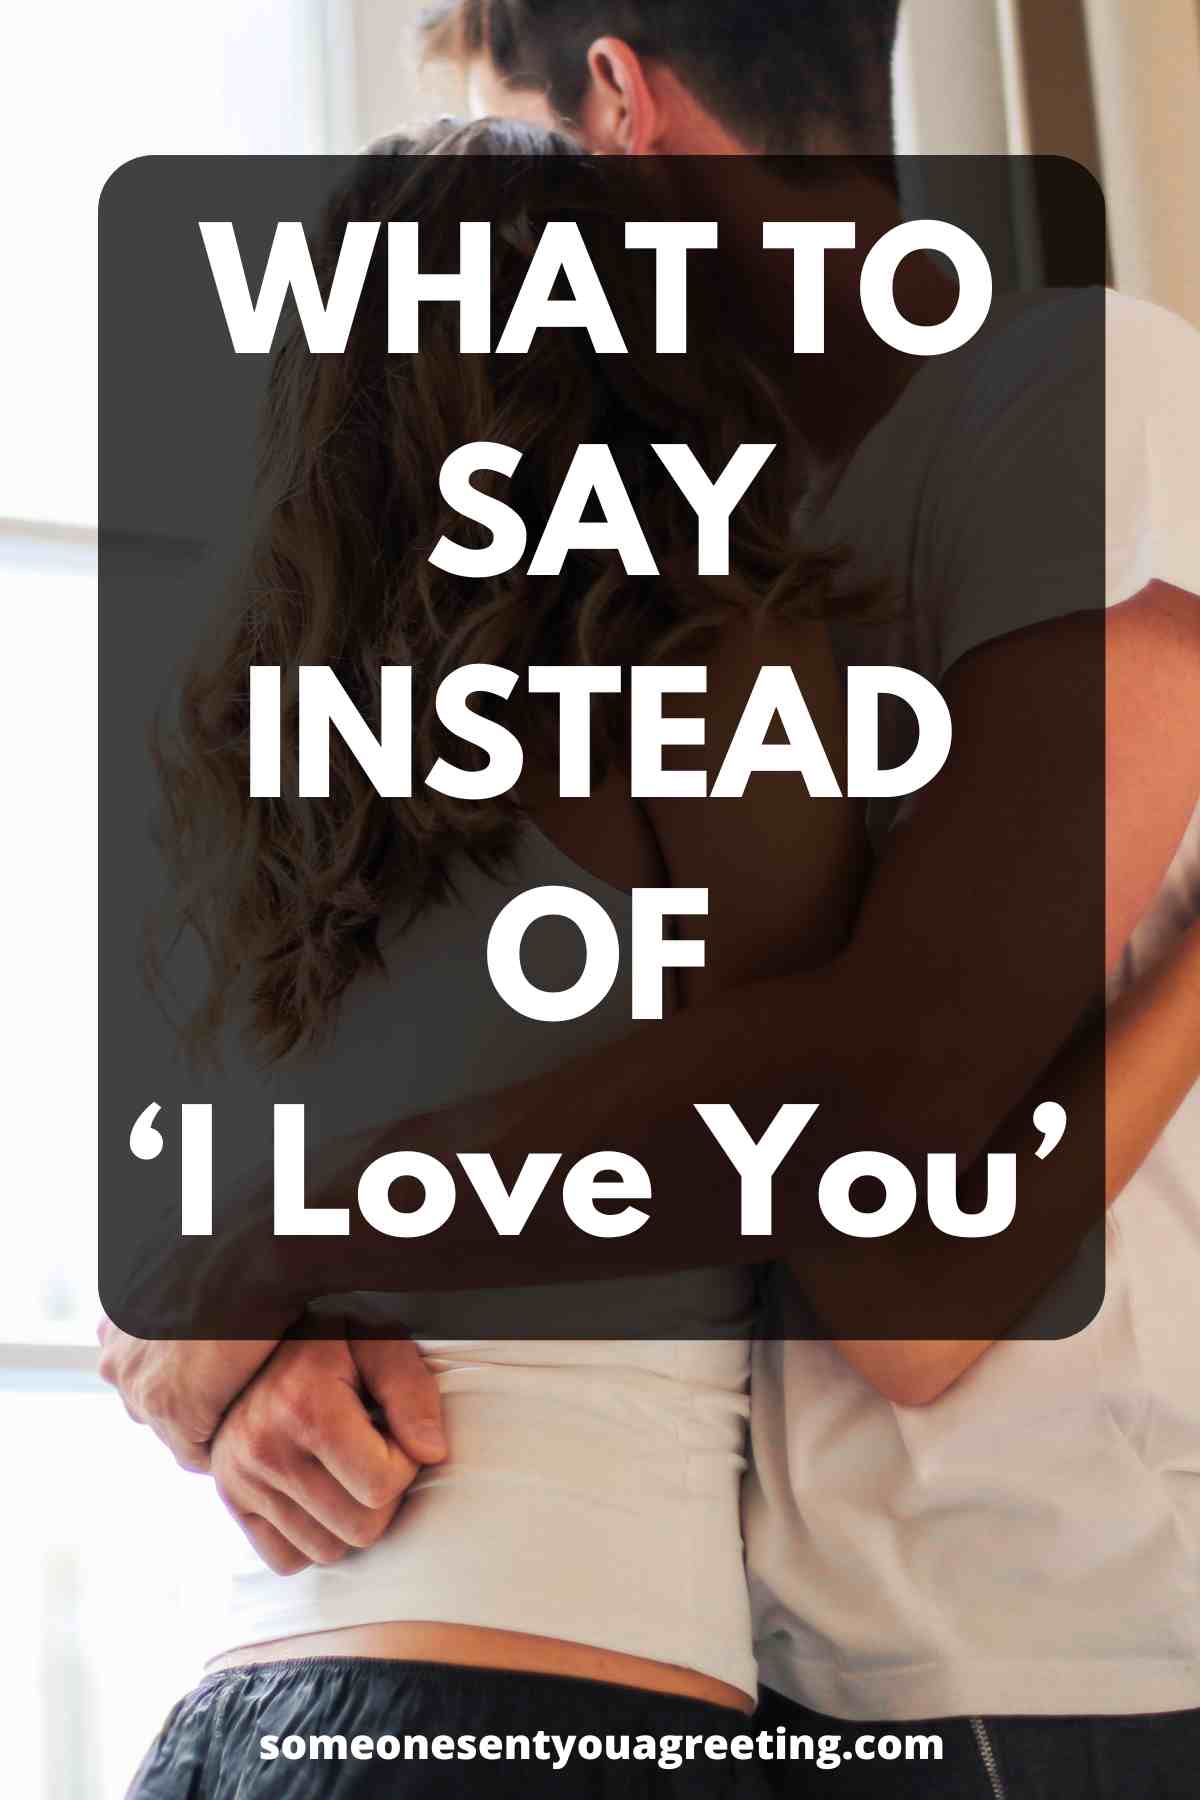 What to say instead of I love you